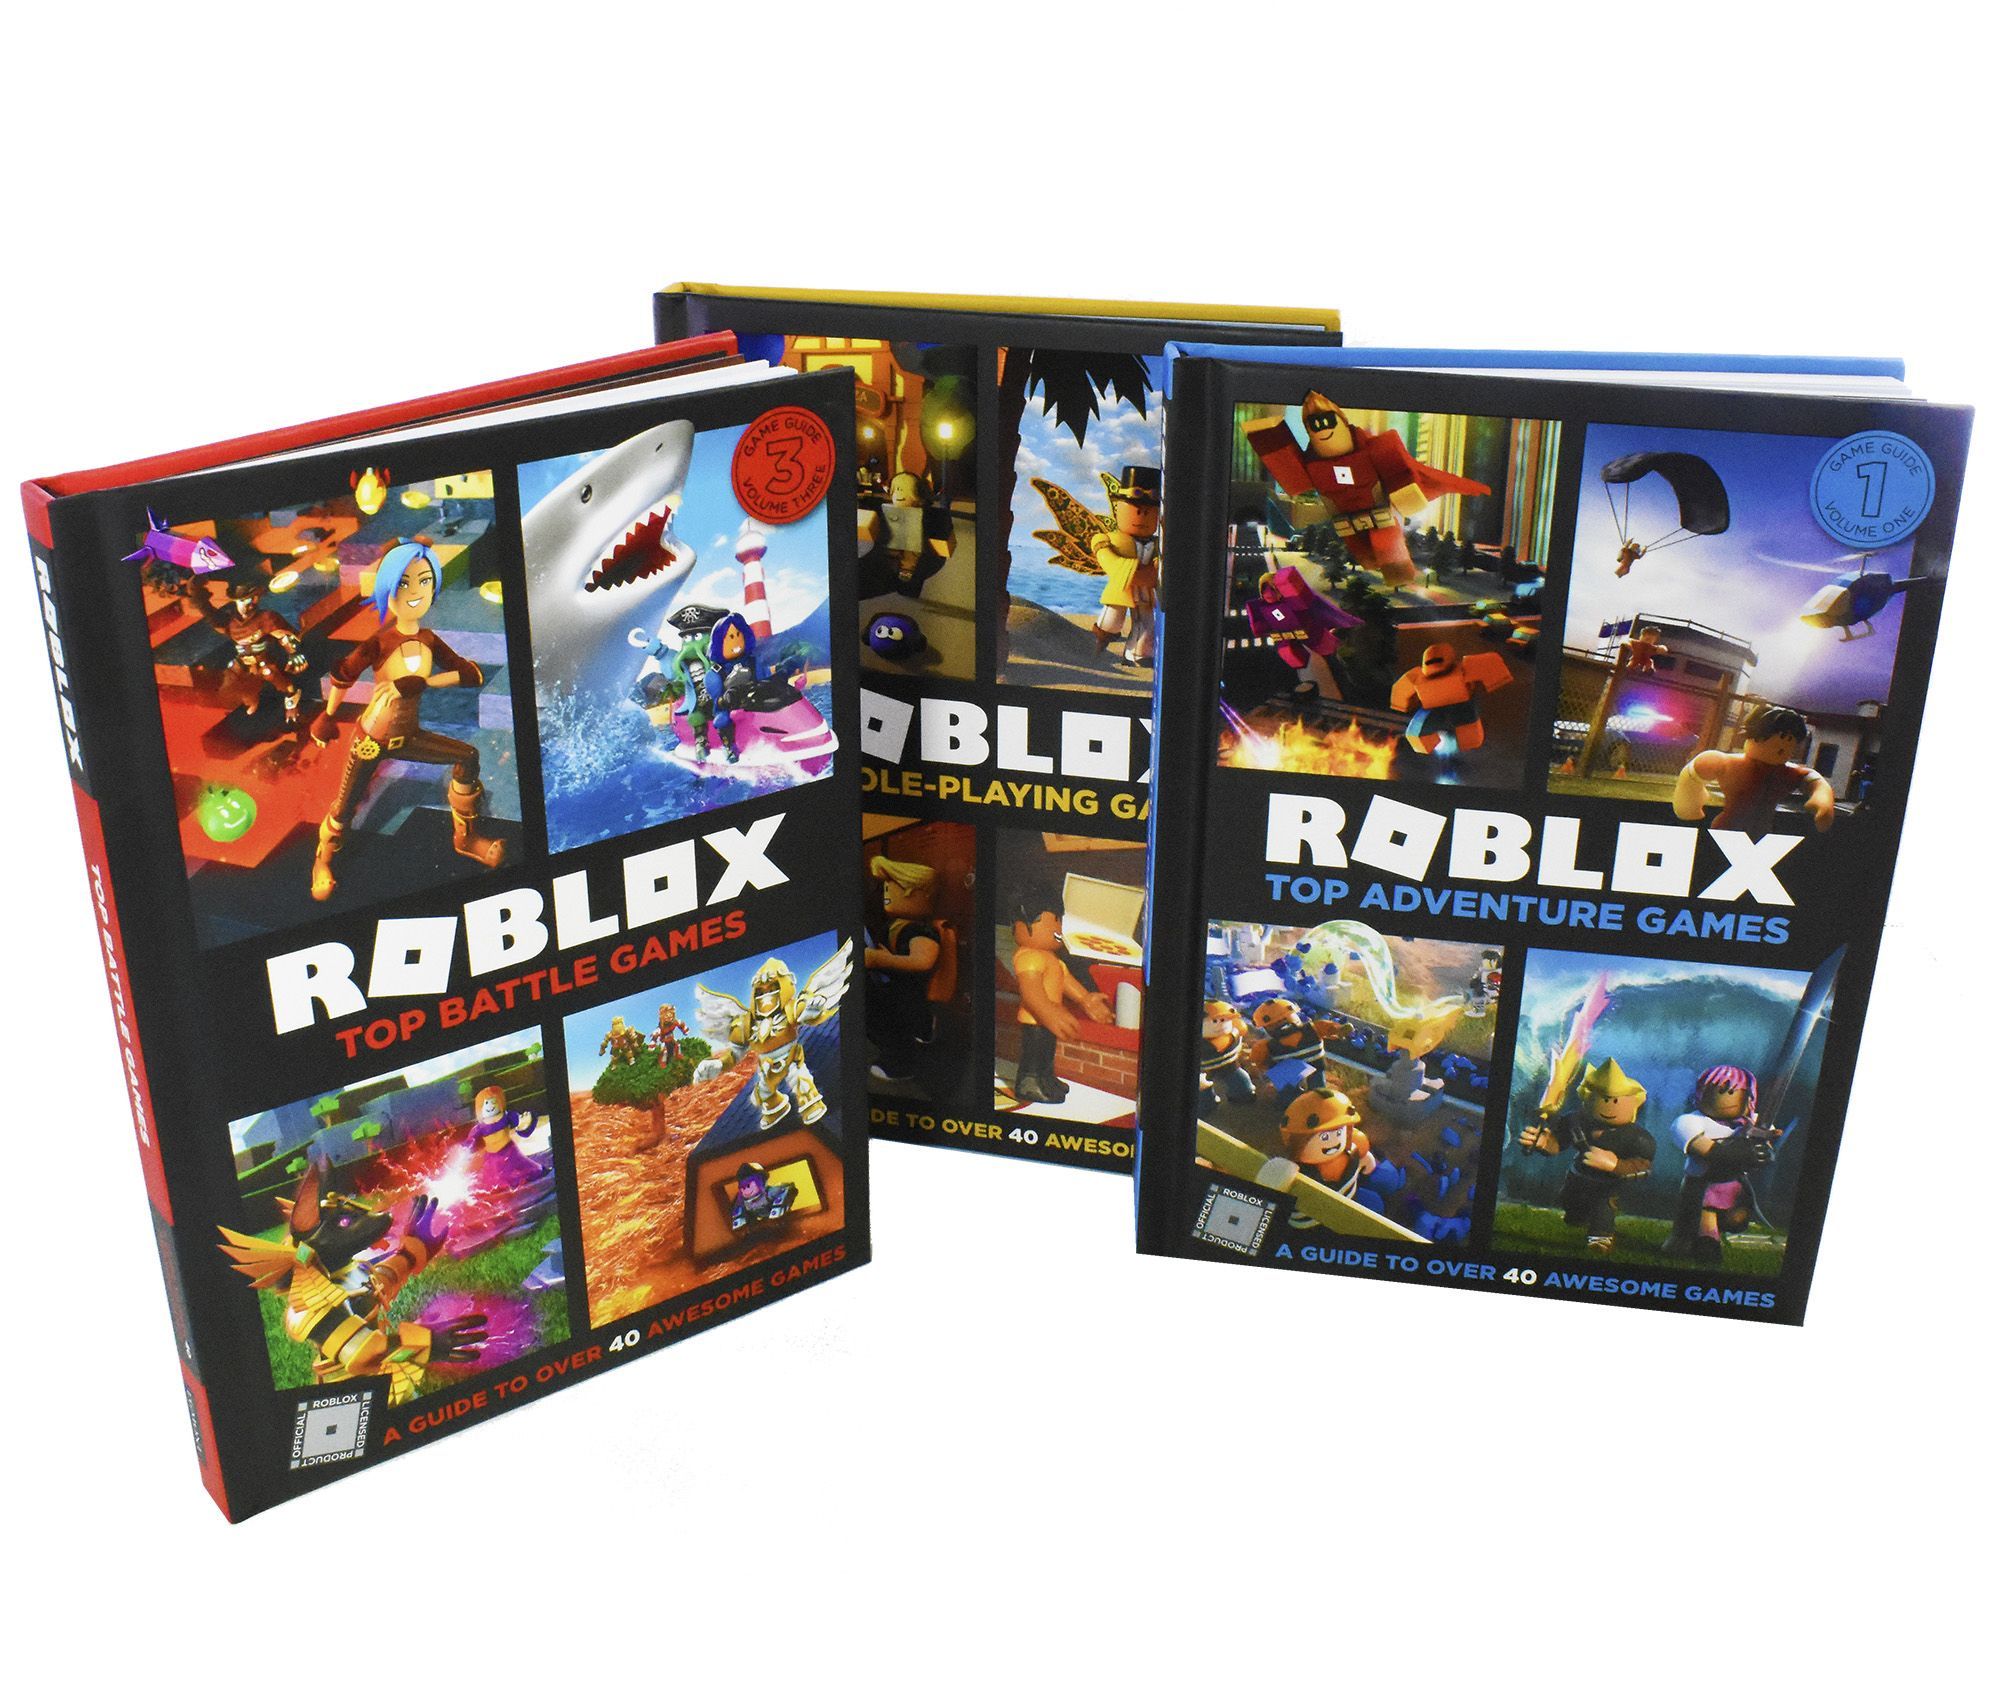 Roblox Guest adventures - Free stories online. Create books for